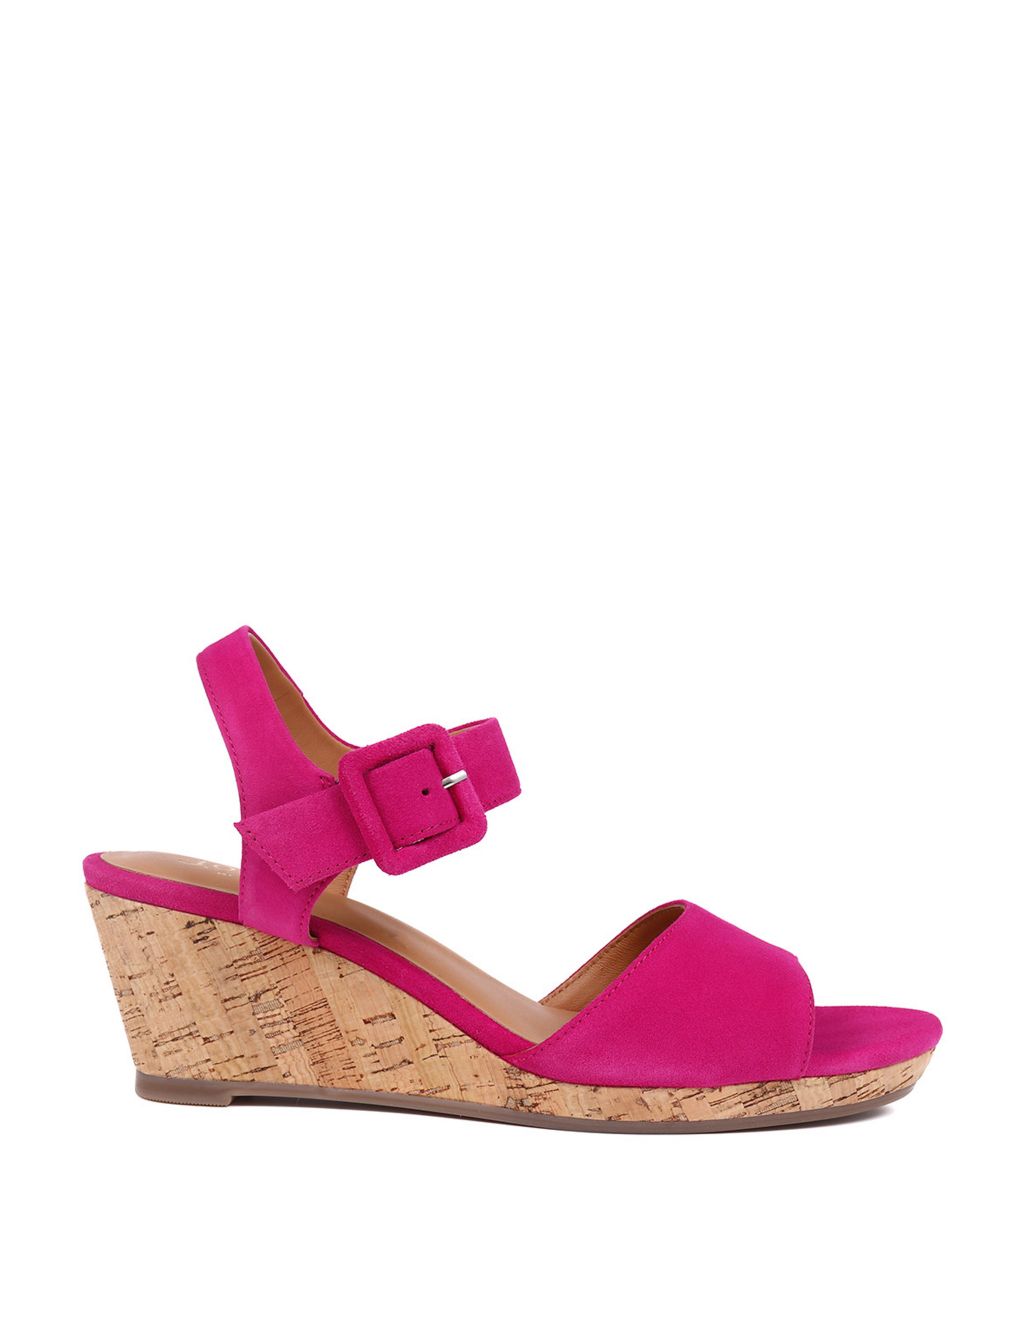 Suede Ankle Strap Wedge Sandals image 2